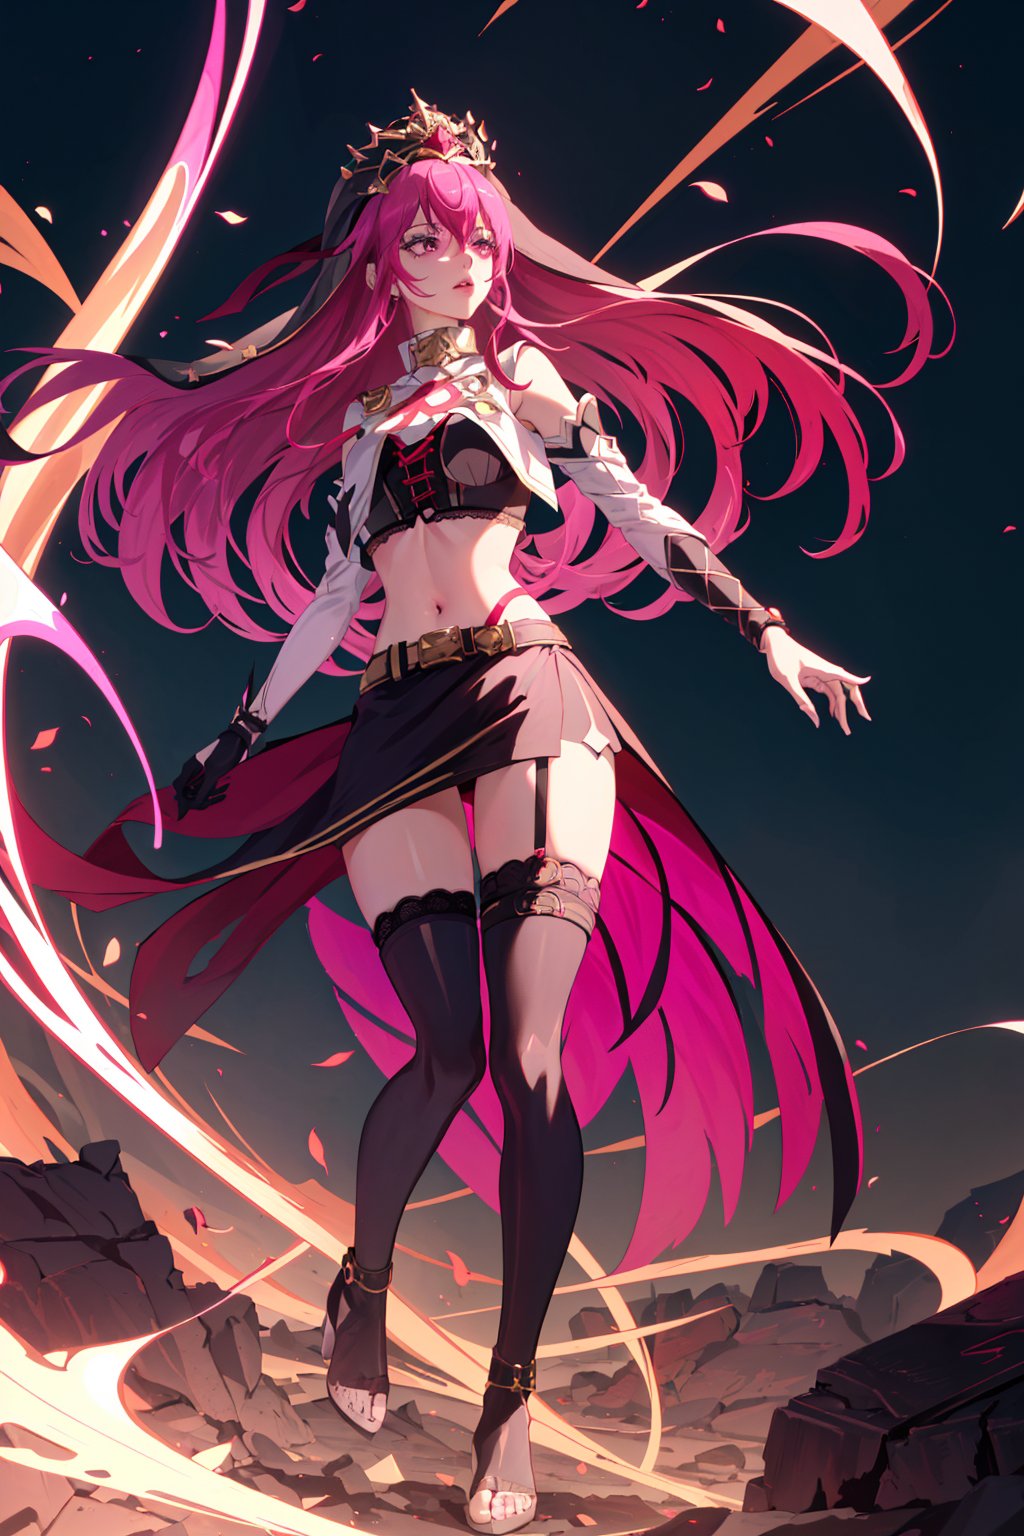 an accurate and detailed full body shot of a young adult female character named Rosaltis, a determined and mysterious aura, (Long flowing magenta hair with pink highlights:1.5), violet-indigo eyes, Seductive makeup, defined lips, (Imperial Veil Crown:1.3), (a white high collar crop top:1.7), (a gothic lace corset underneath crop top:1.4), (Long black opera gloves:1.1), (gold bracers:1.2), (A long black slit-skirt:1.3), Fishnet stockings, Red and gold garter belts, (knee-high Soft-knit wedge heels:1.2), A black belt with various trinkets, Flowing red ribbons, gold accent jewelry, masterpiece, high quality, 4K, rosaria(genshin impact), jessie pokemon, Altair Recreators, pastel<lora:EMS-36230-EMS:0.600000>, <lora:EMS-259677-EMS:0.700000>, <lora:EMS-12256-EMS:0.500000>